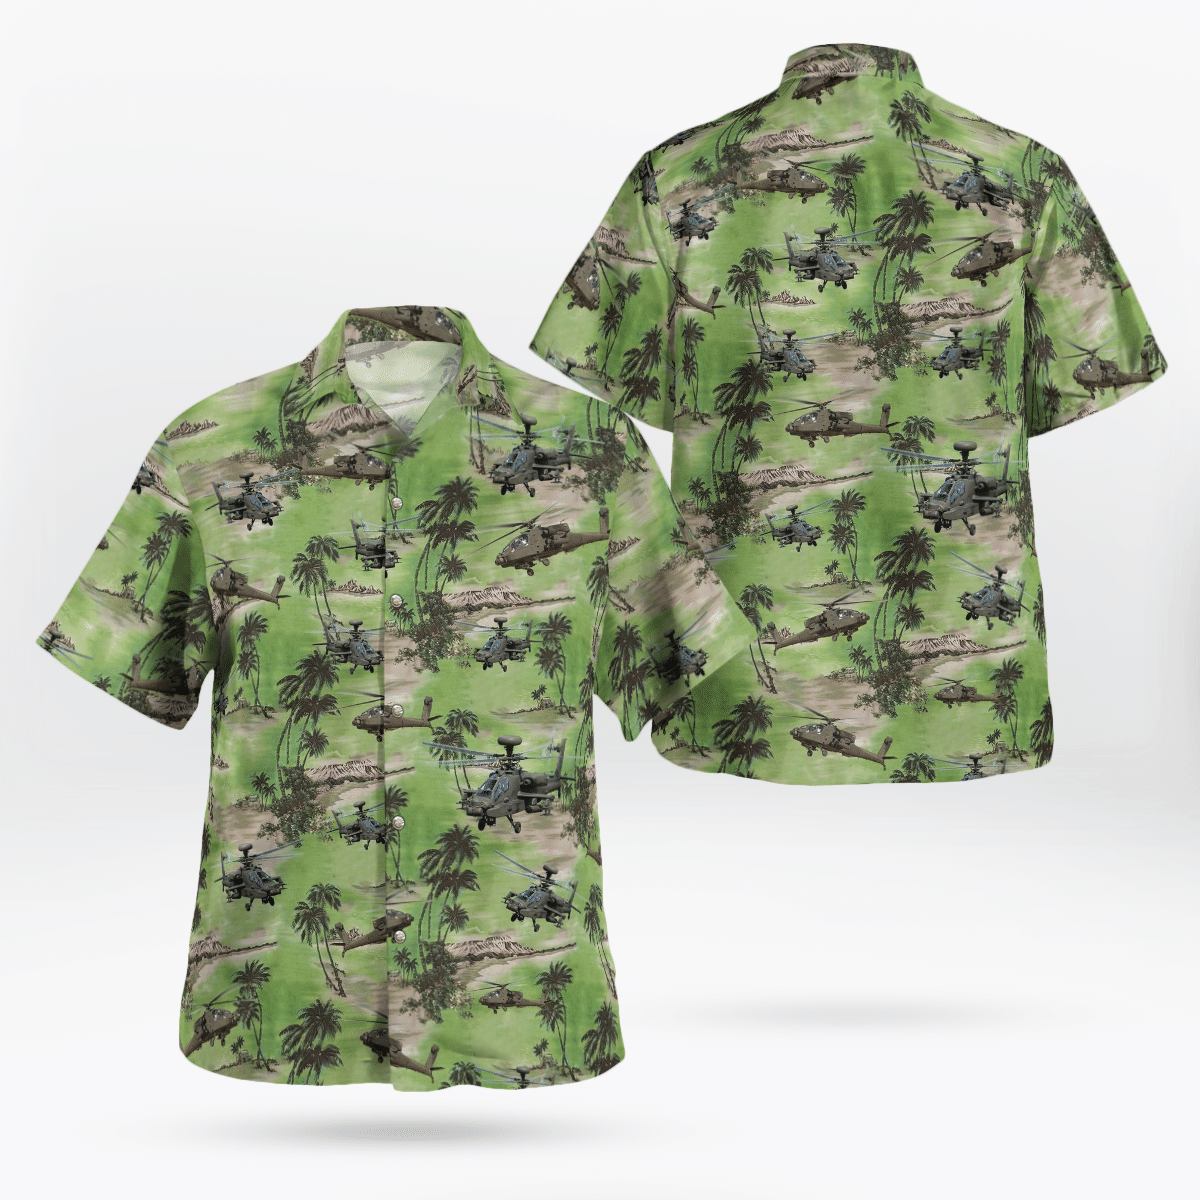 Consider getting these Hawaiian Shirt for your friends 405